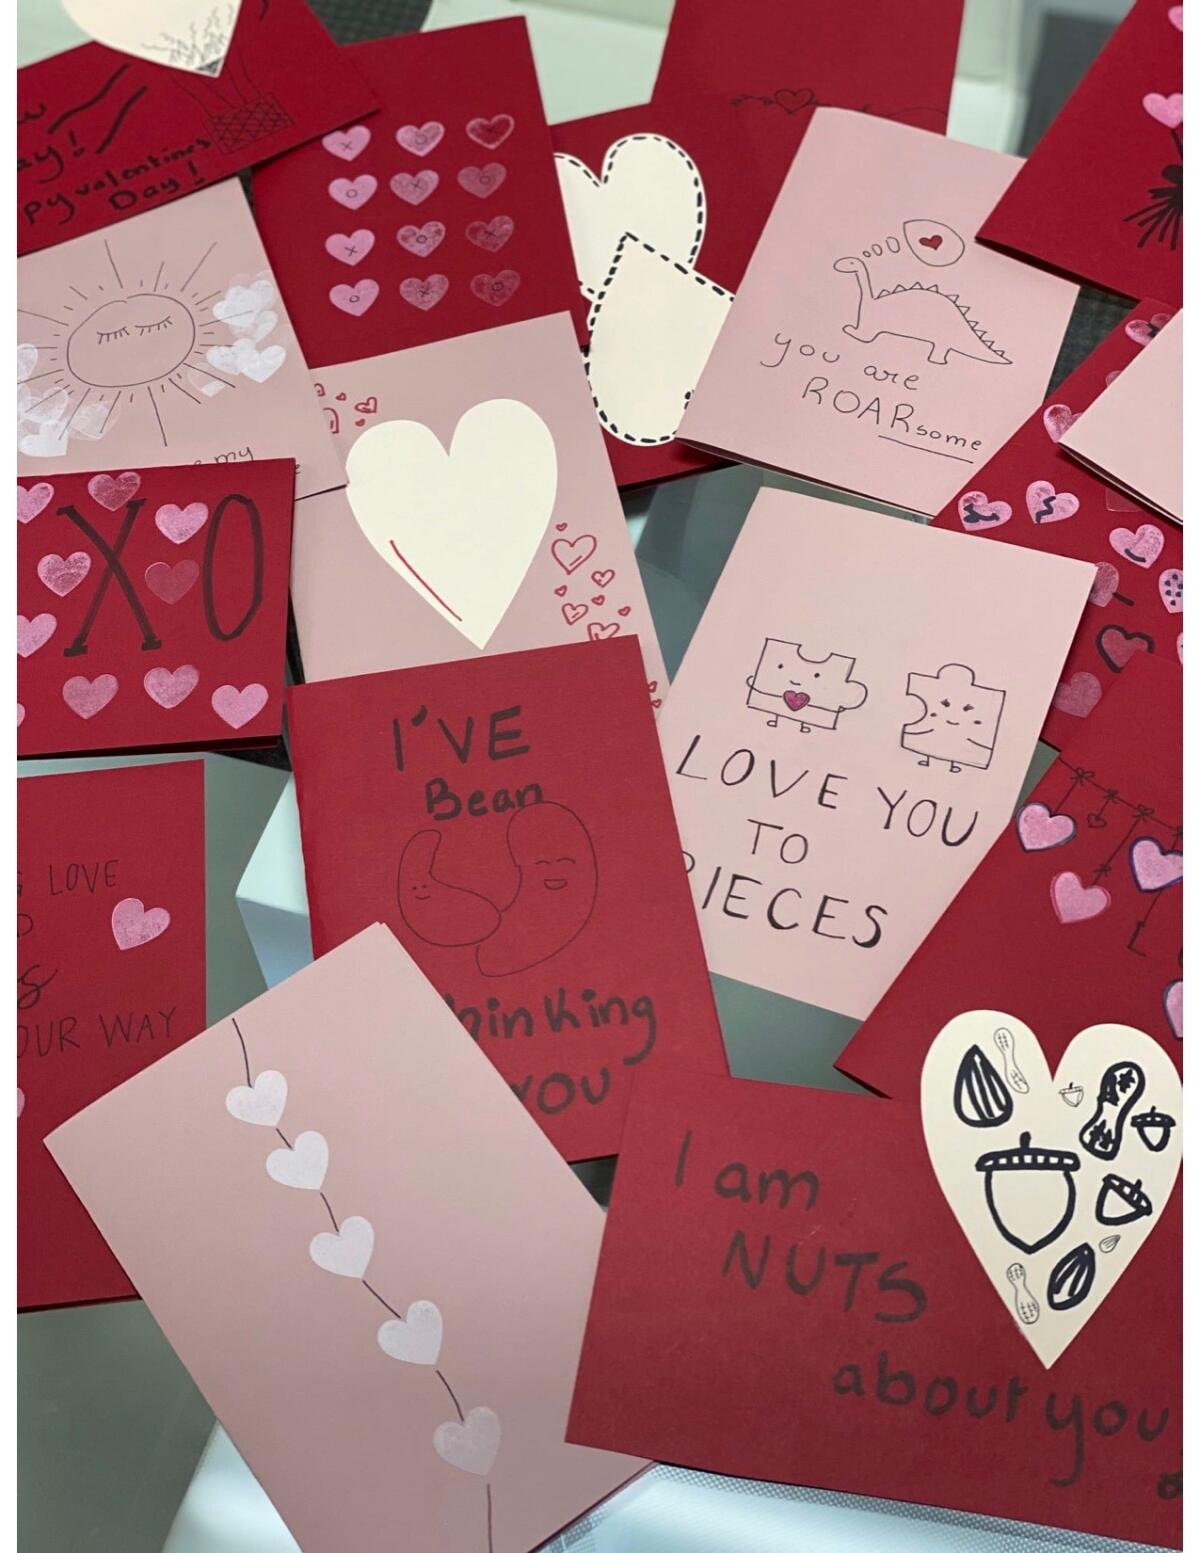 I Love You Monica  Hearts - Greetings Cards for Valentine's Day for Monica  